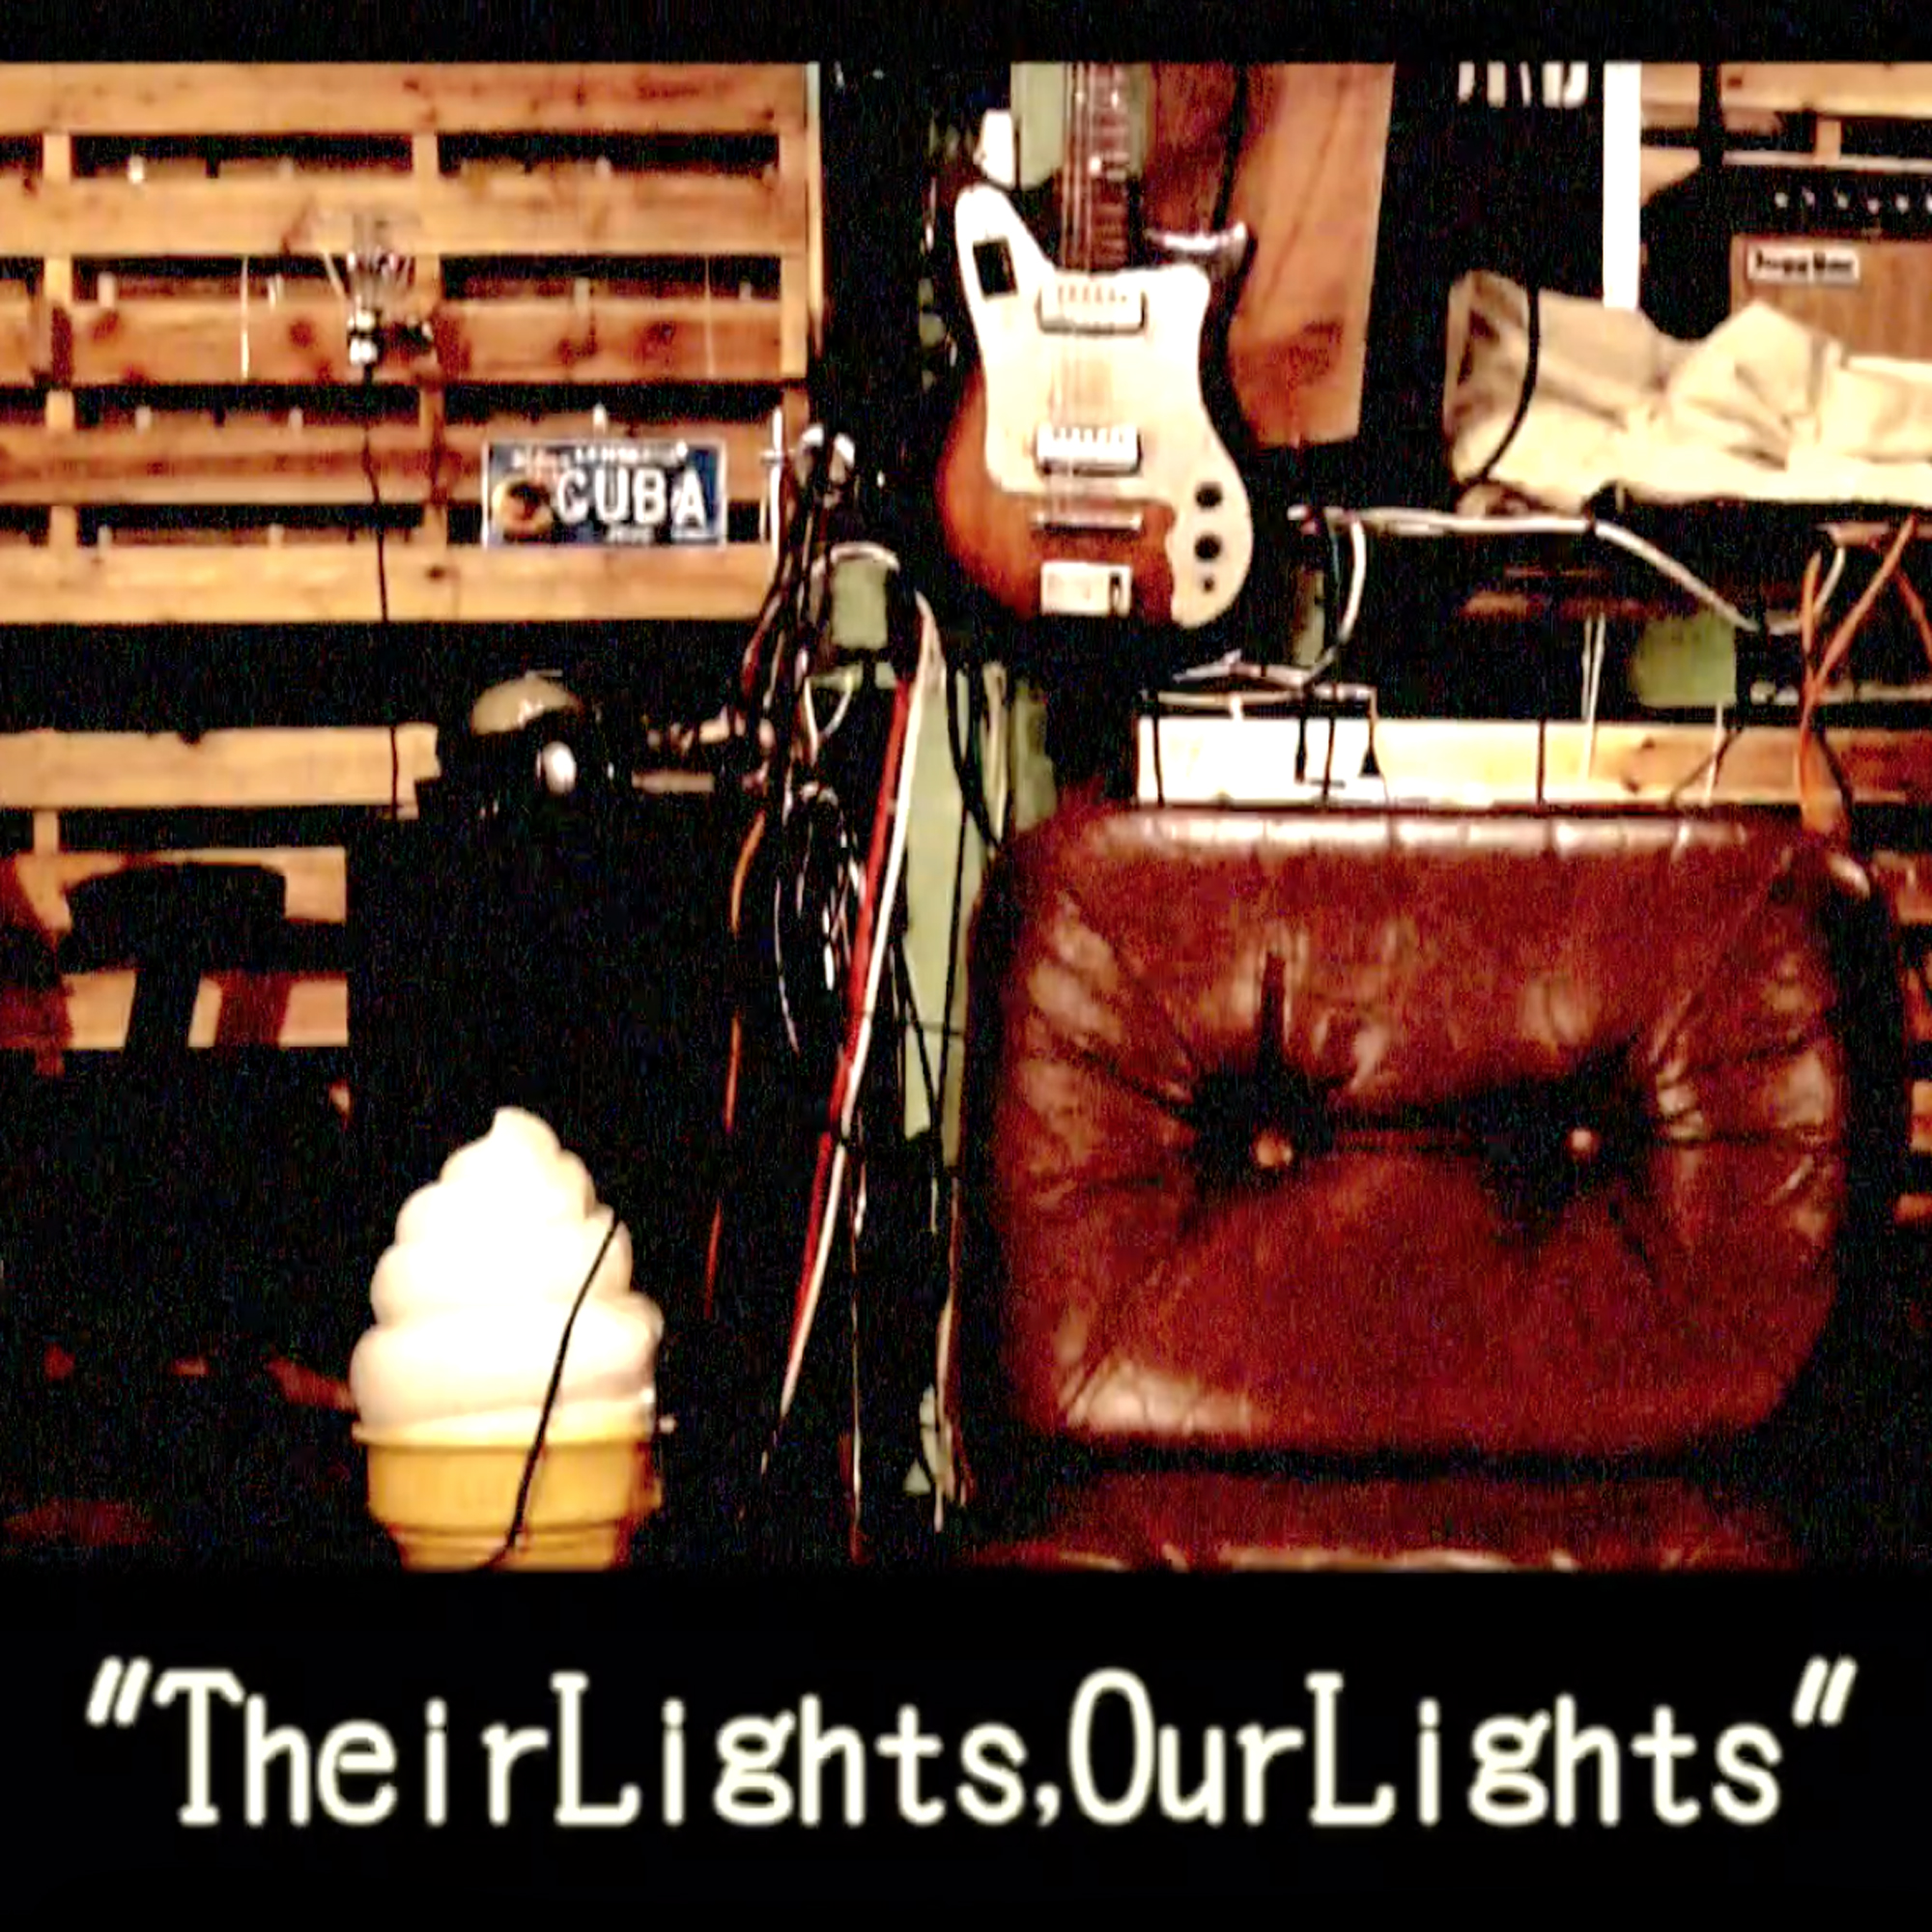 Theirlights,Ourlights